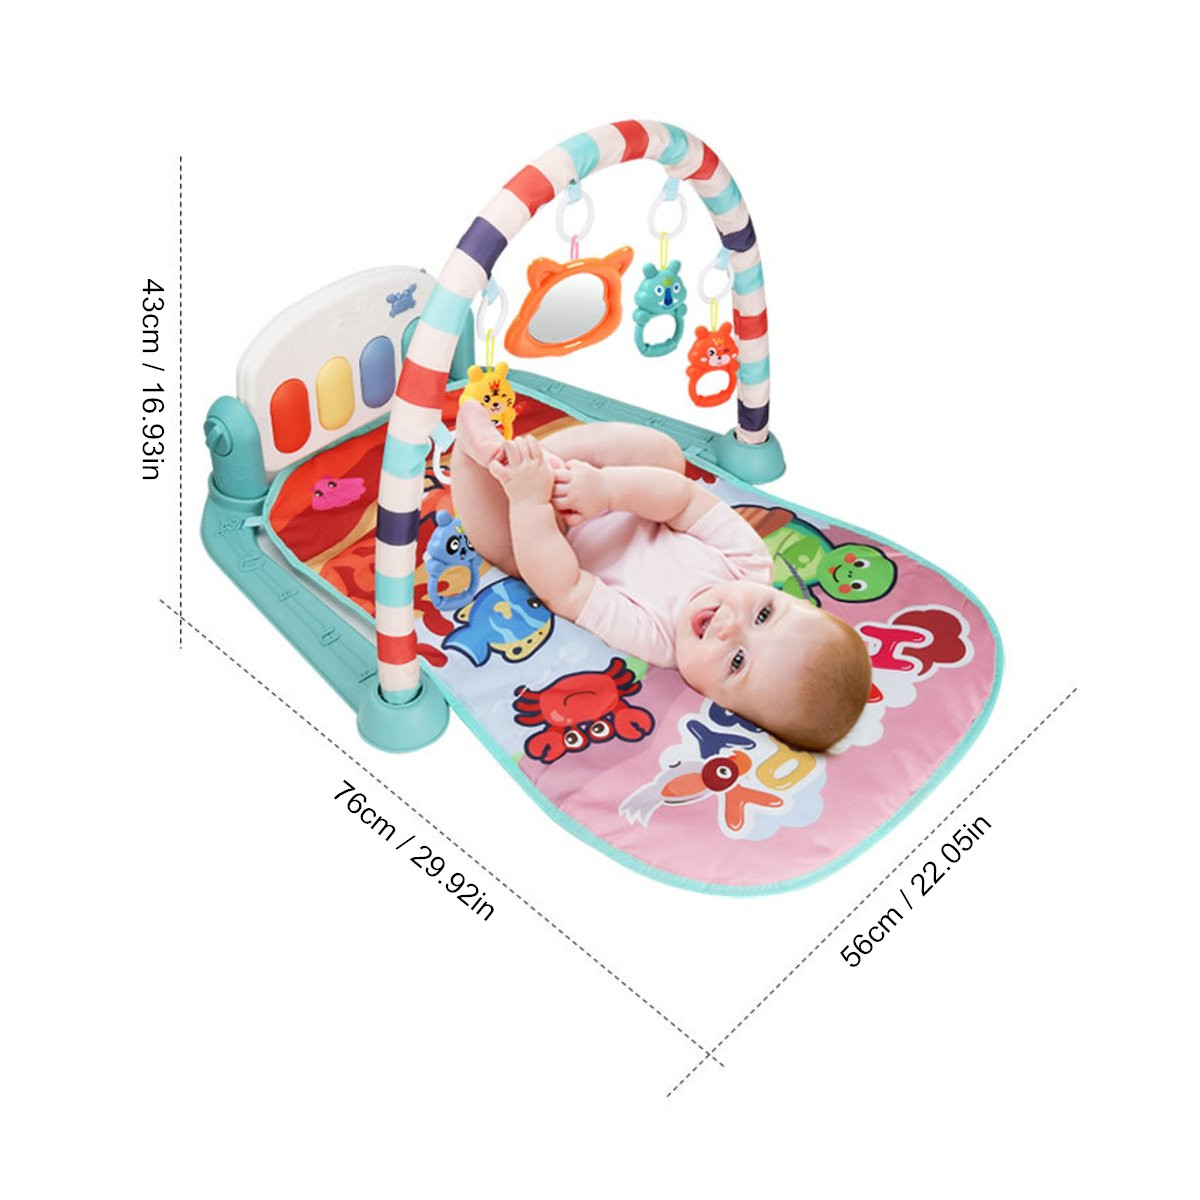 765643CM-2-IN-1-Multi-functional-Baby-Gym-with-Play-Mat-Keyboard-Soft-Light-Rattle-Toys-for-Baby-Gif-1709556-10